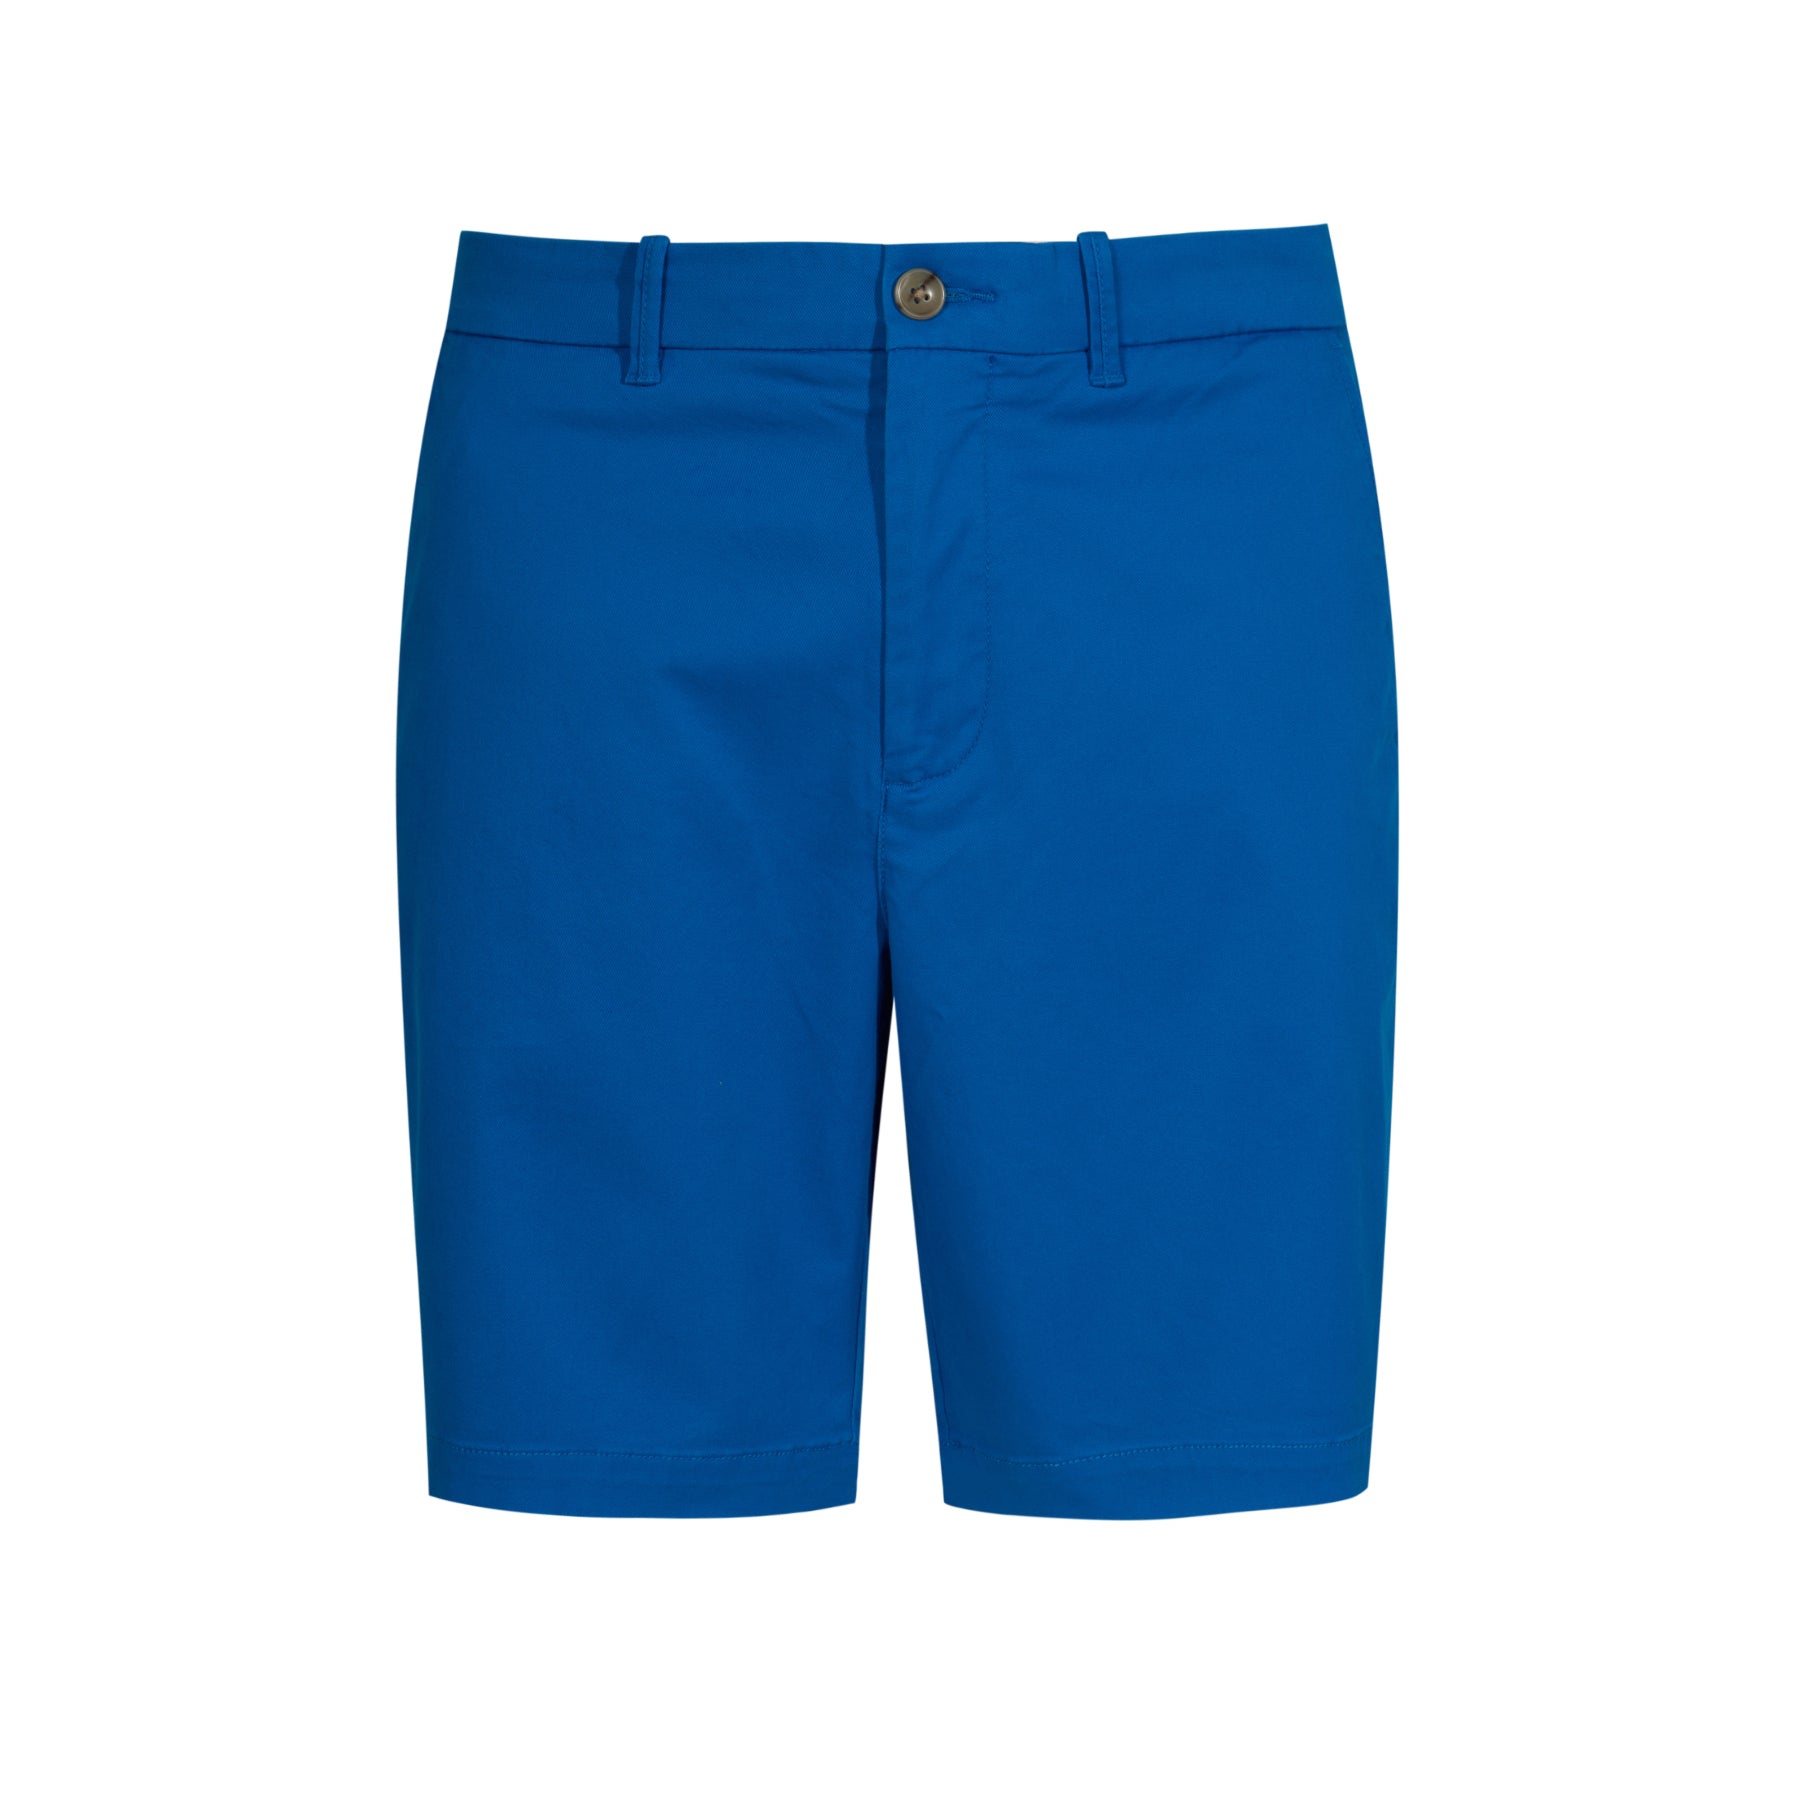 View Basic Recycled Cotton Chino Shorts In Imperial Blue information